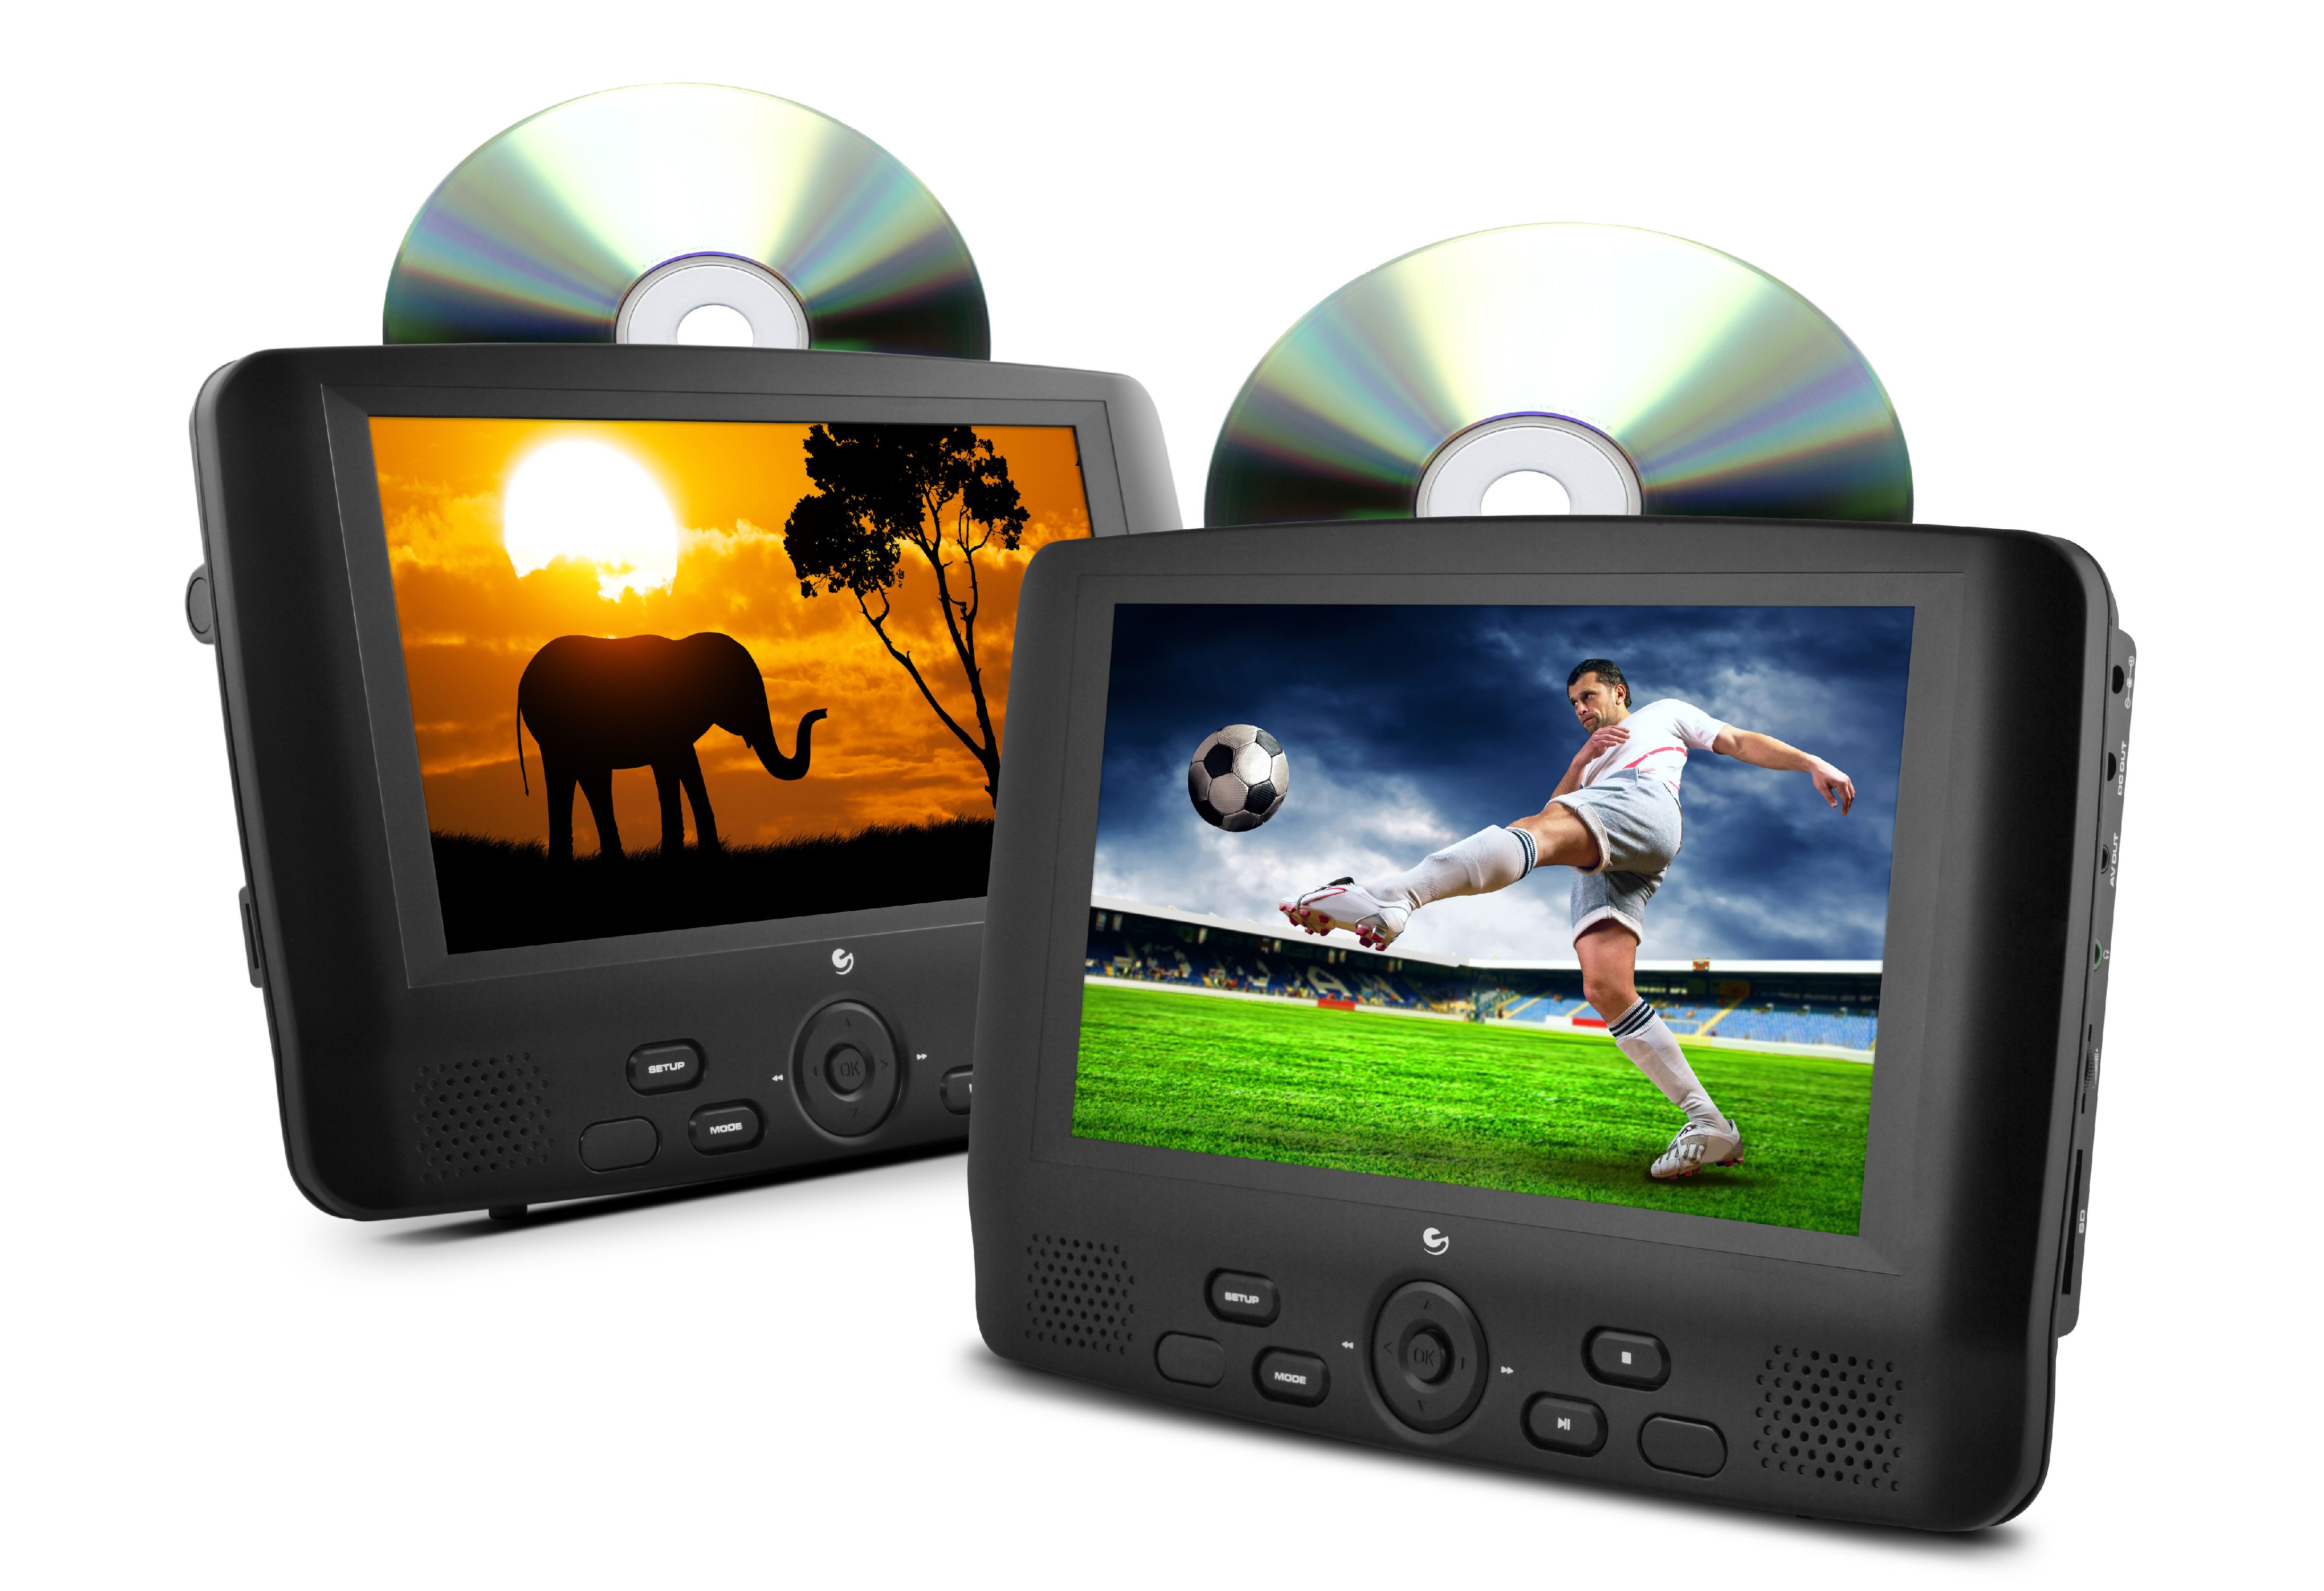 Ematic ED929D 9" Dual Screen Portable DVD Player with Dual DVD Players - image 1 of 4